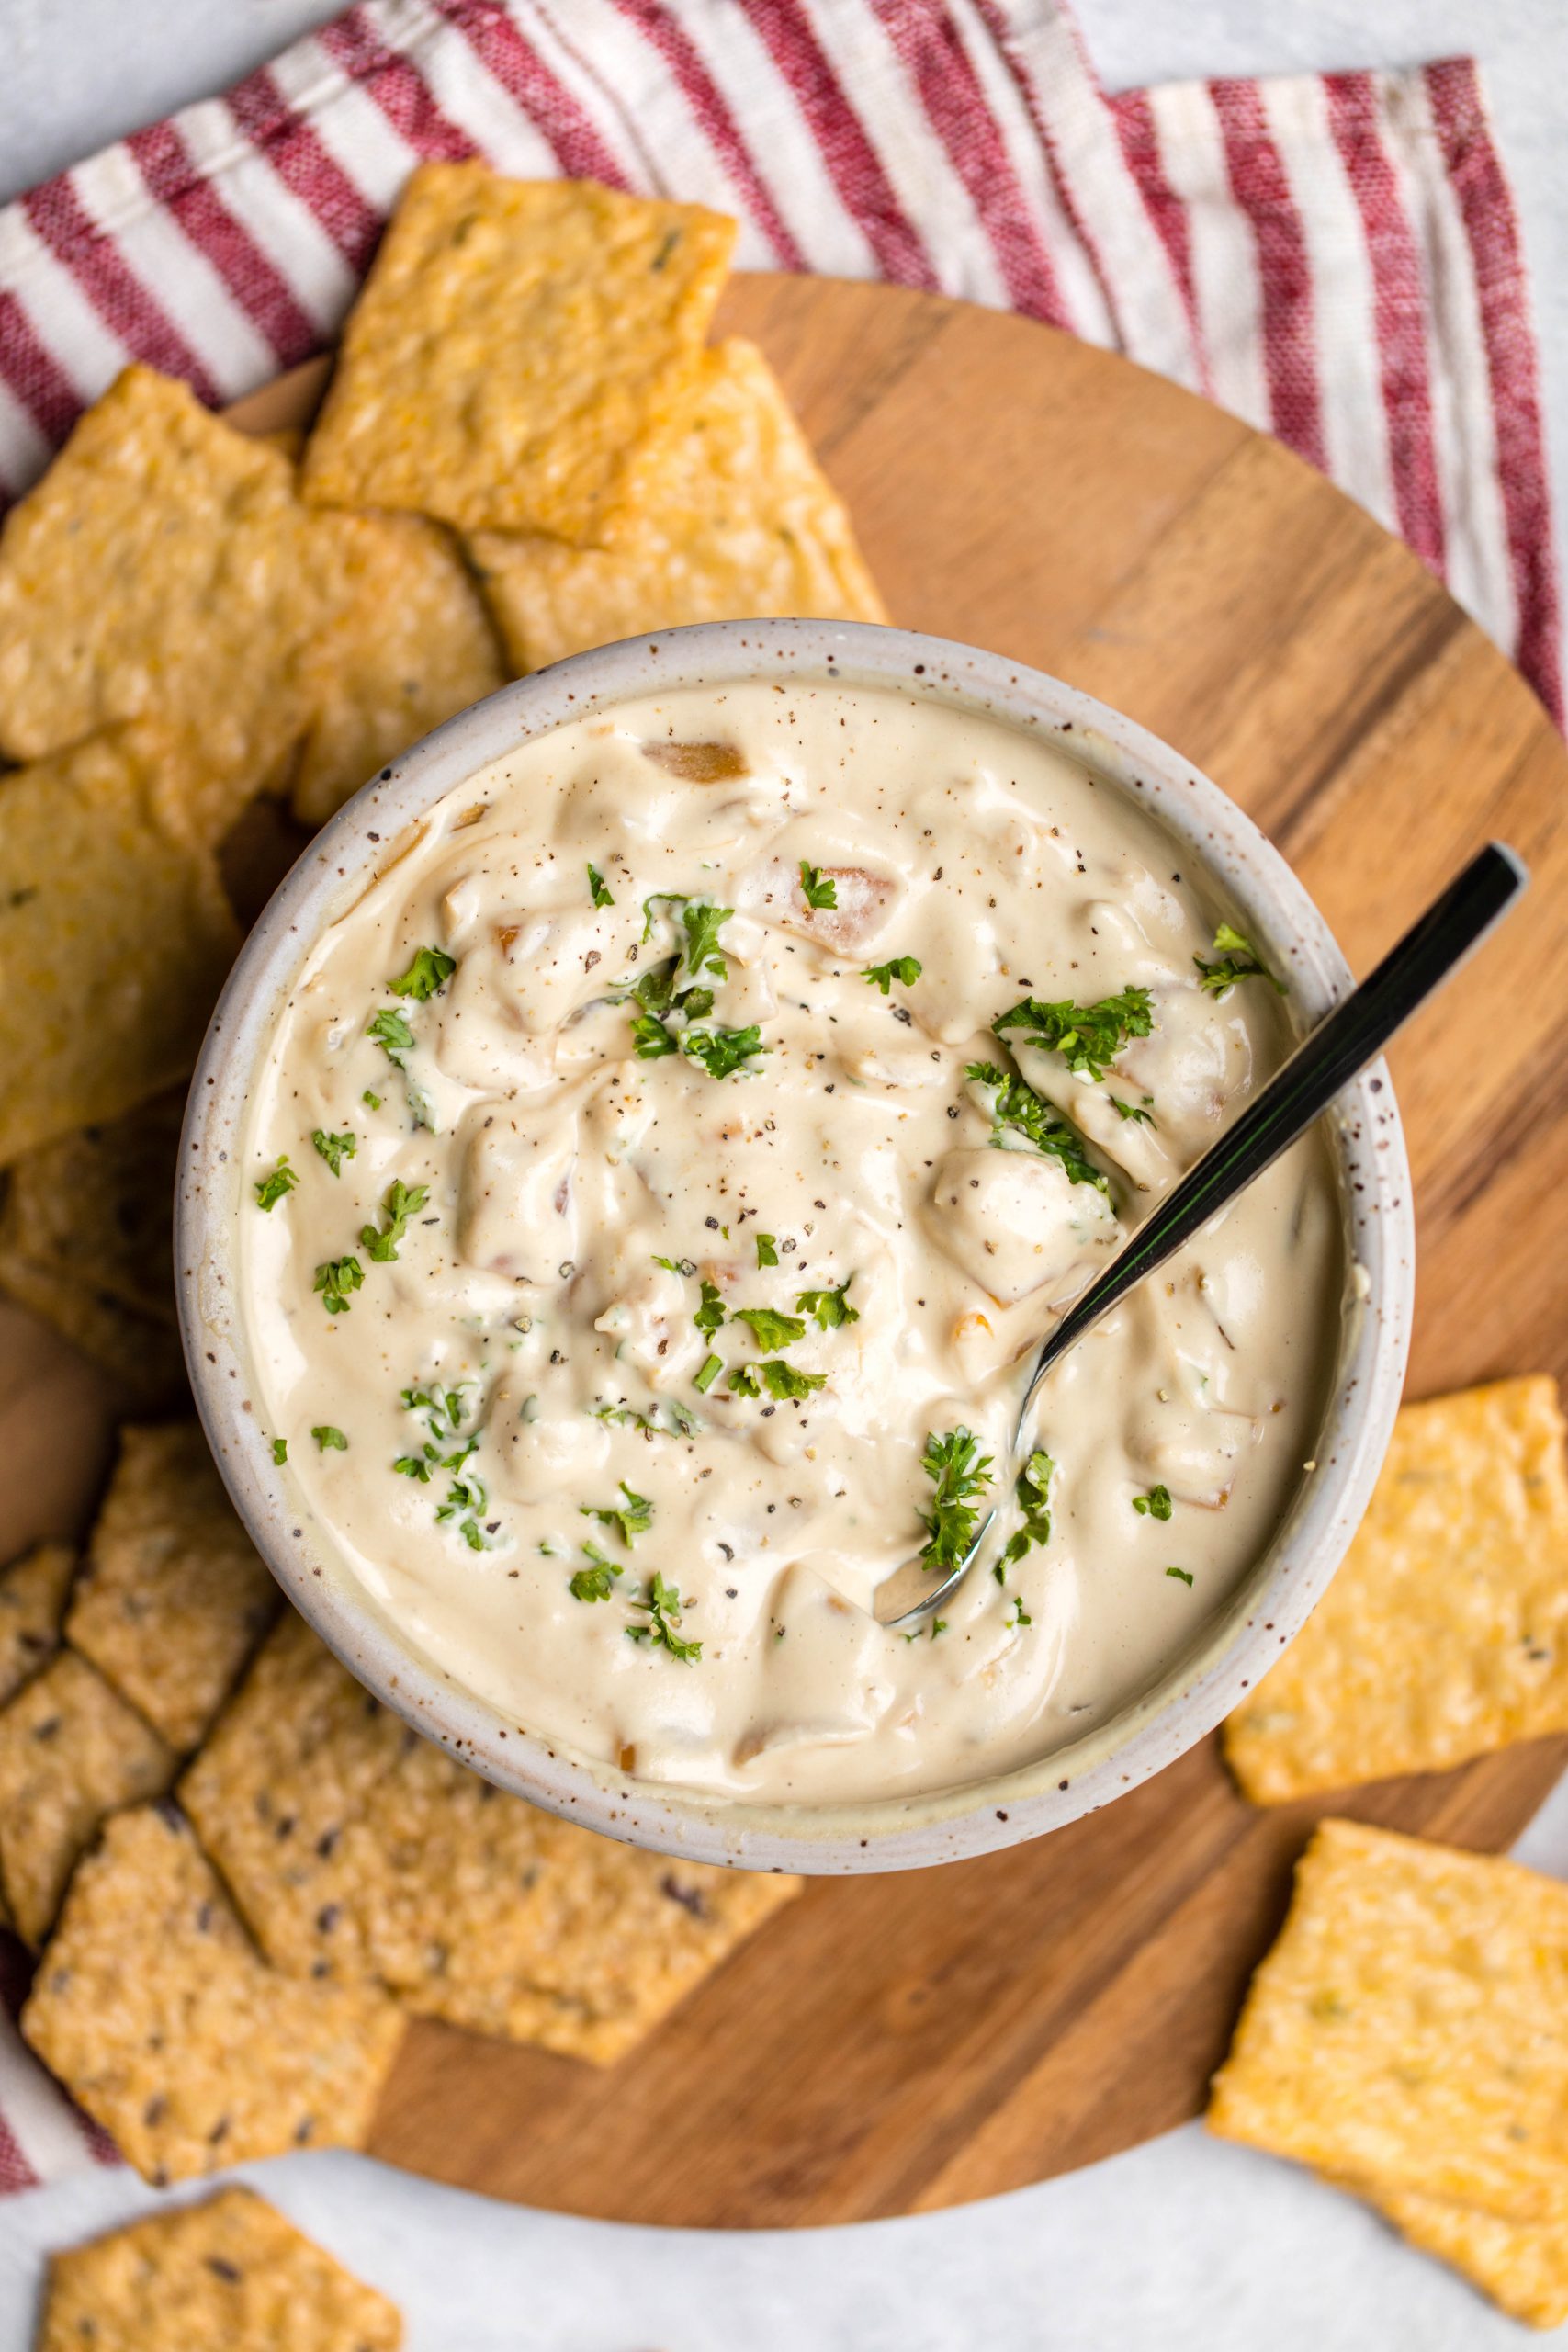 Vegan_French_Onion_Dip_Healthy_GlutenFree_FromMyBowl